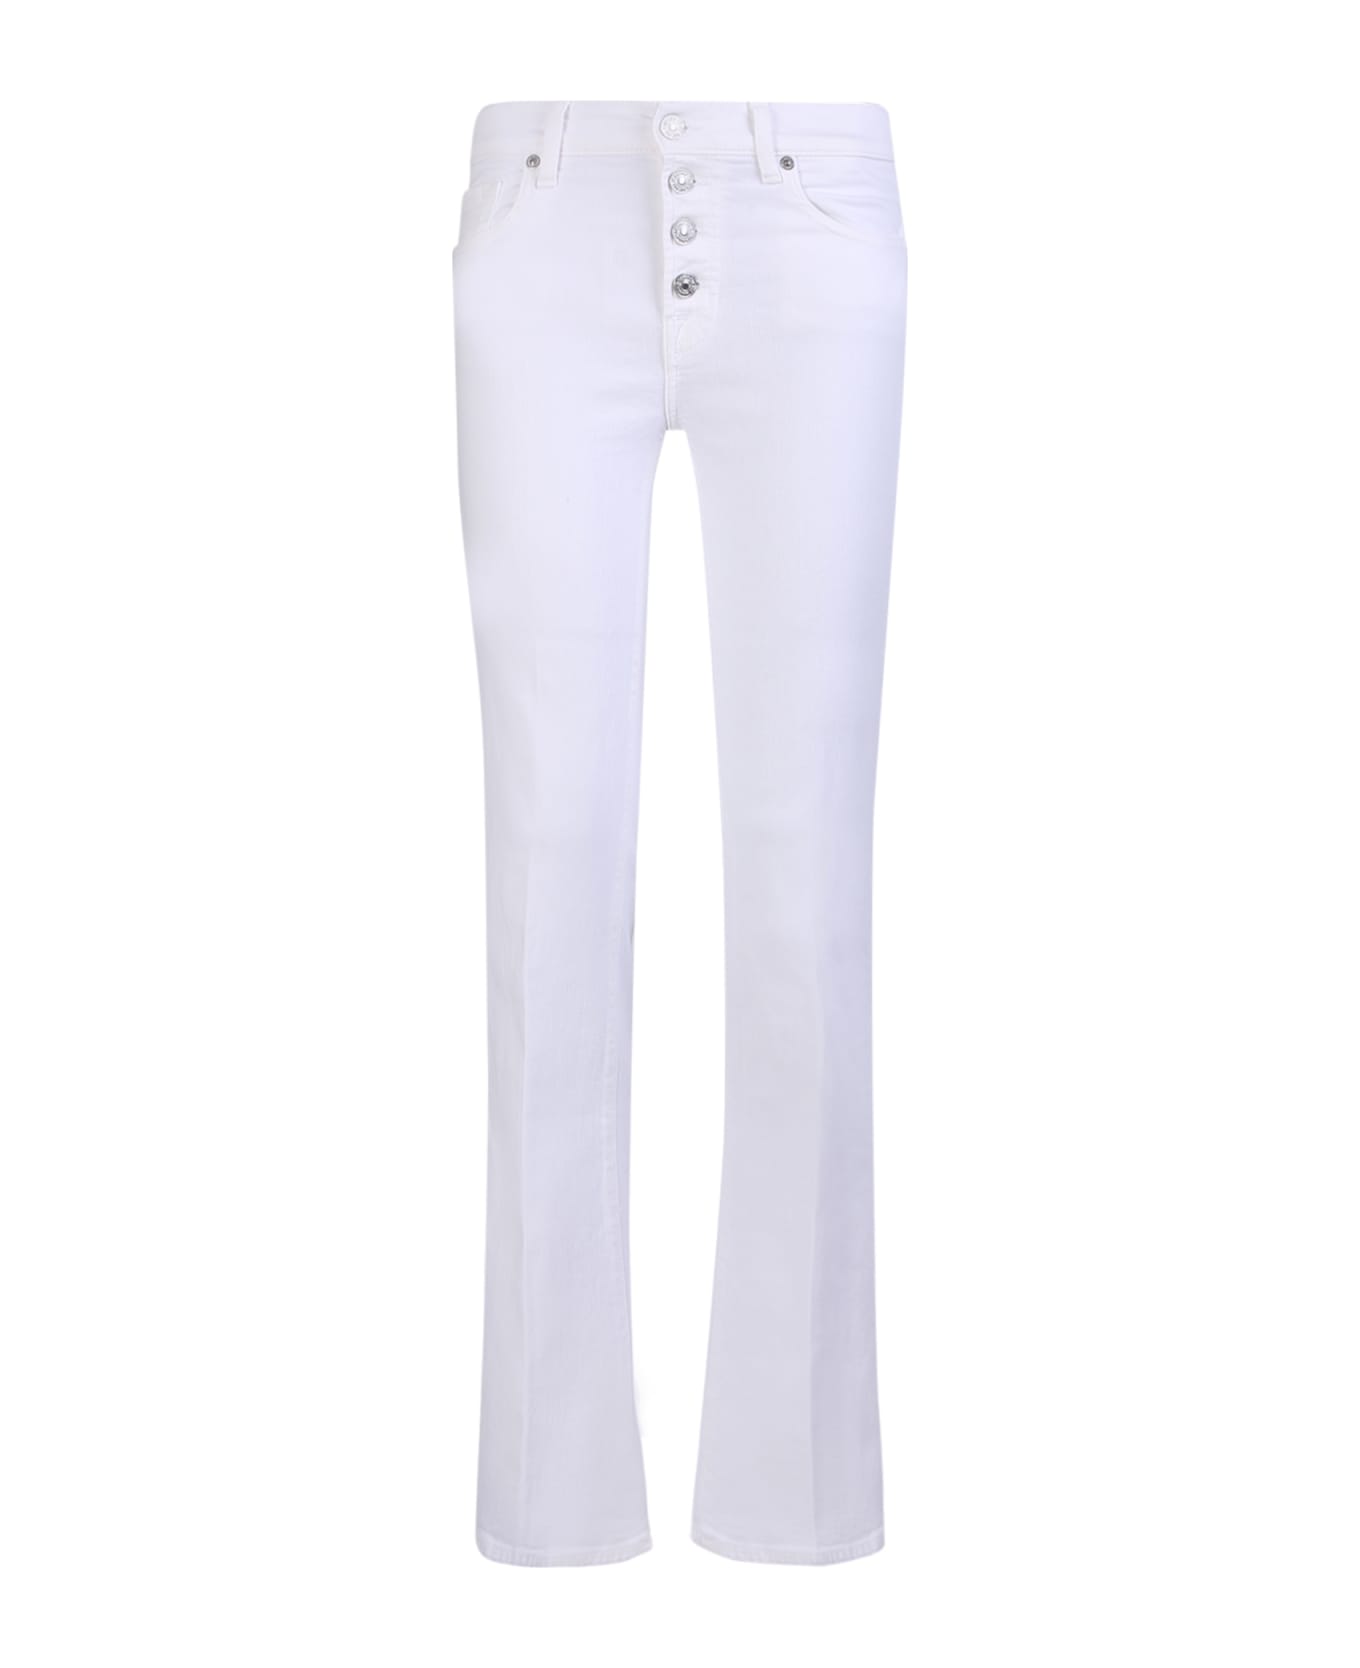 7 For All Mankind Bootcut White Jeans - White デニム